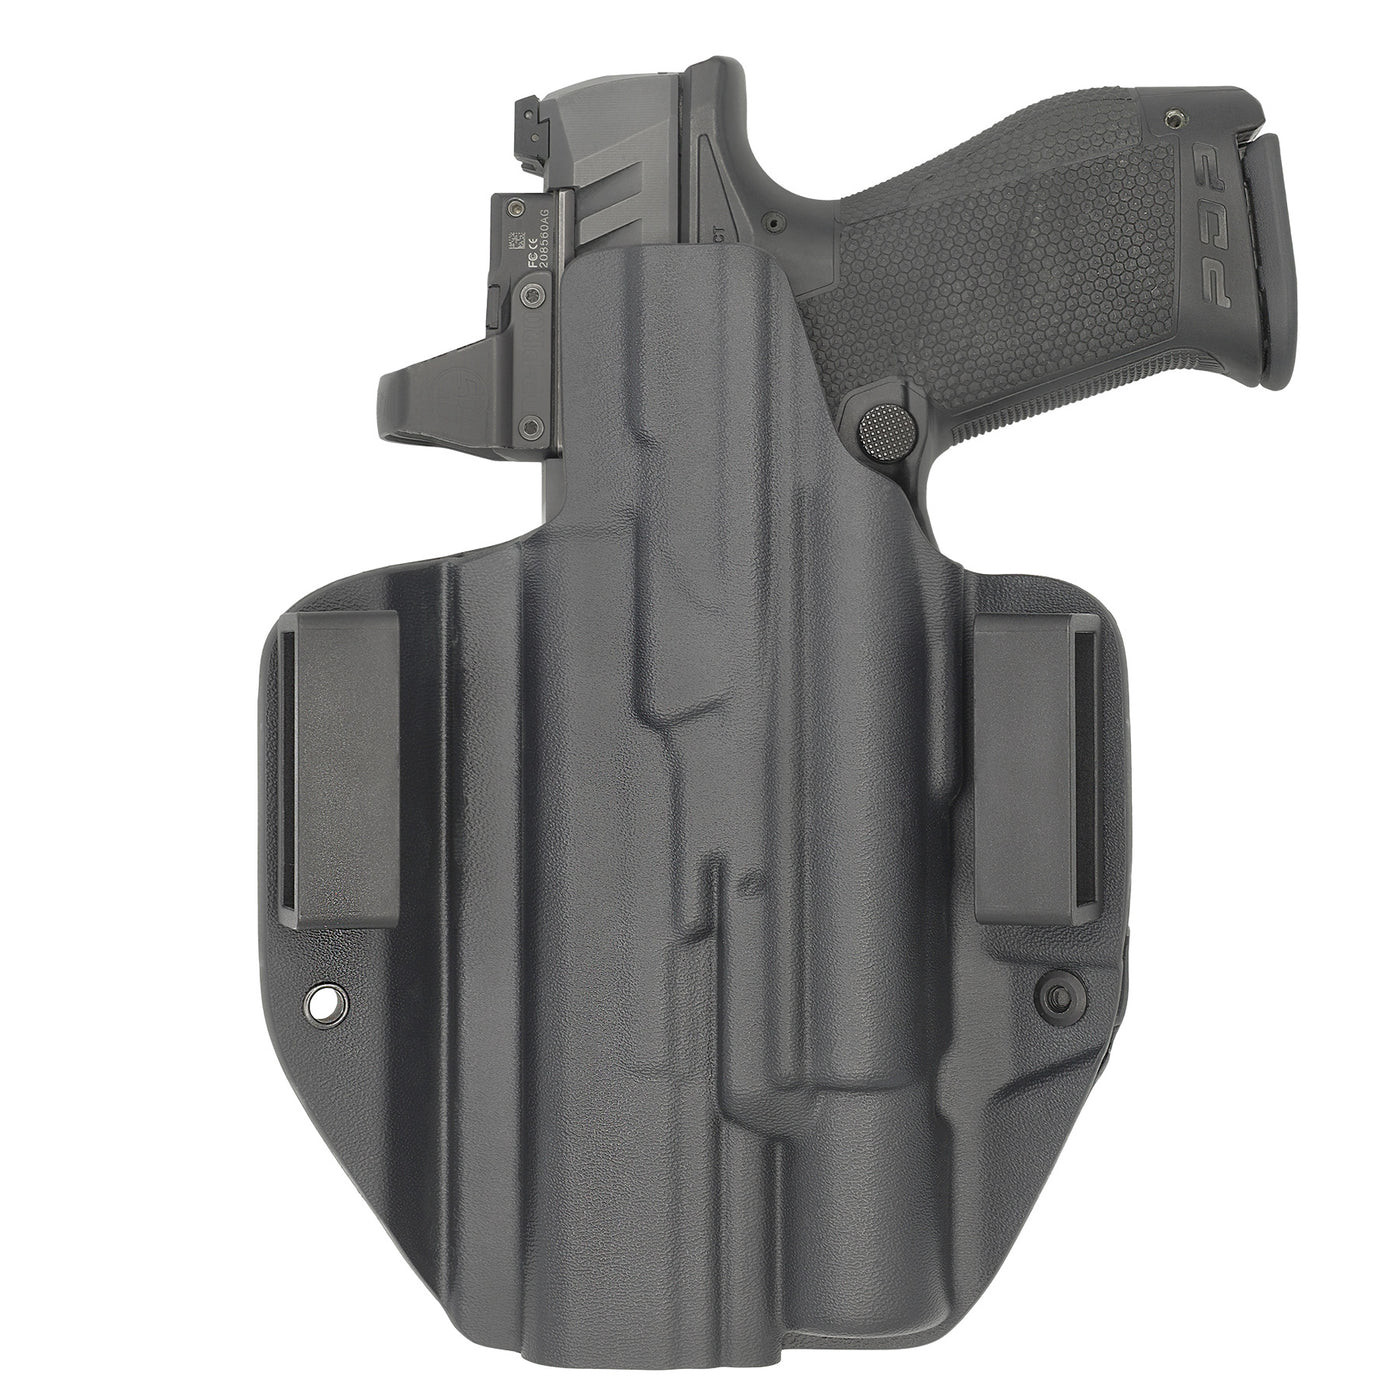 C&G Holsters Quickship OWB Tactical S&W M&P Surefire X300 in holstered position back view